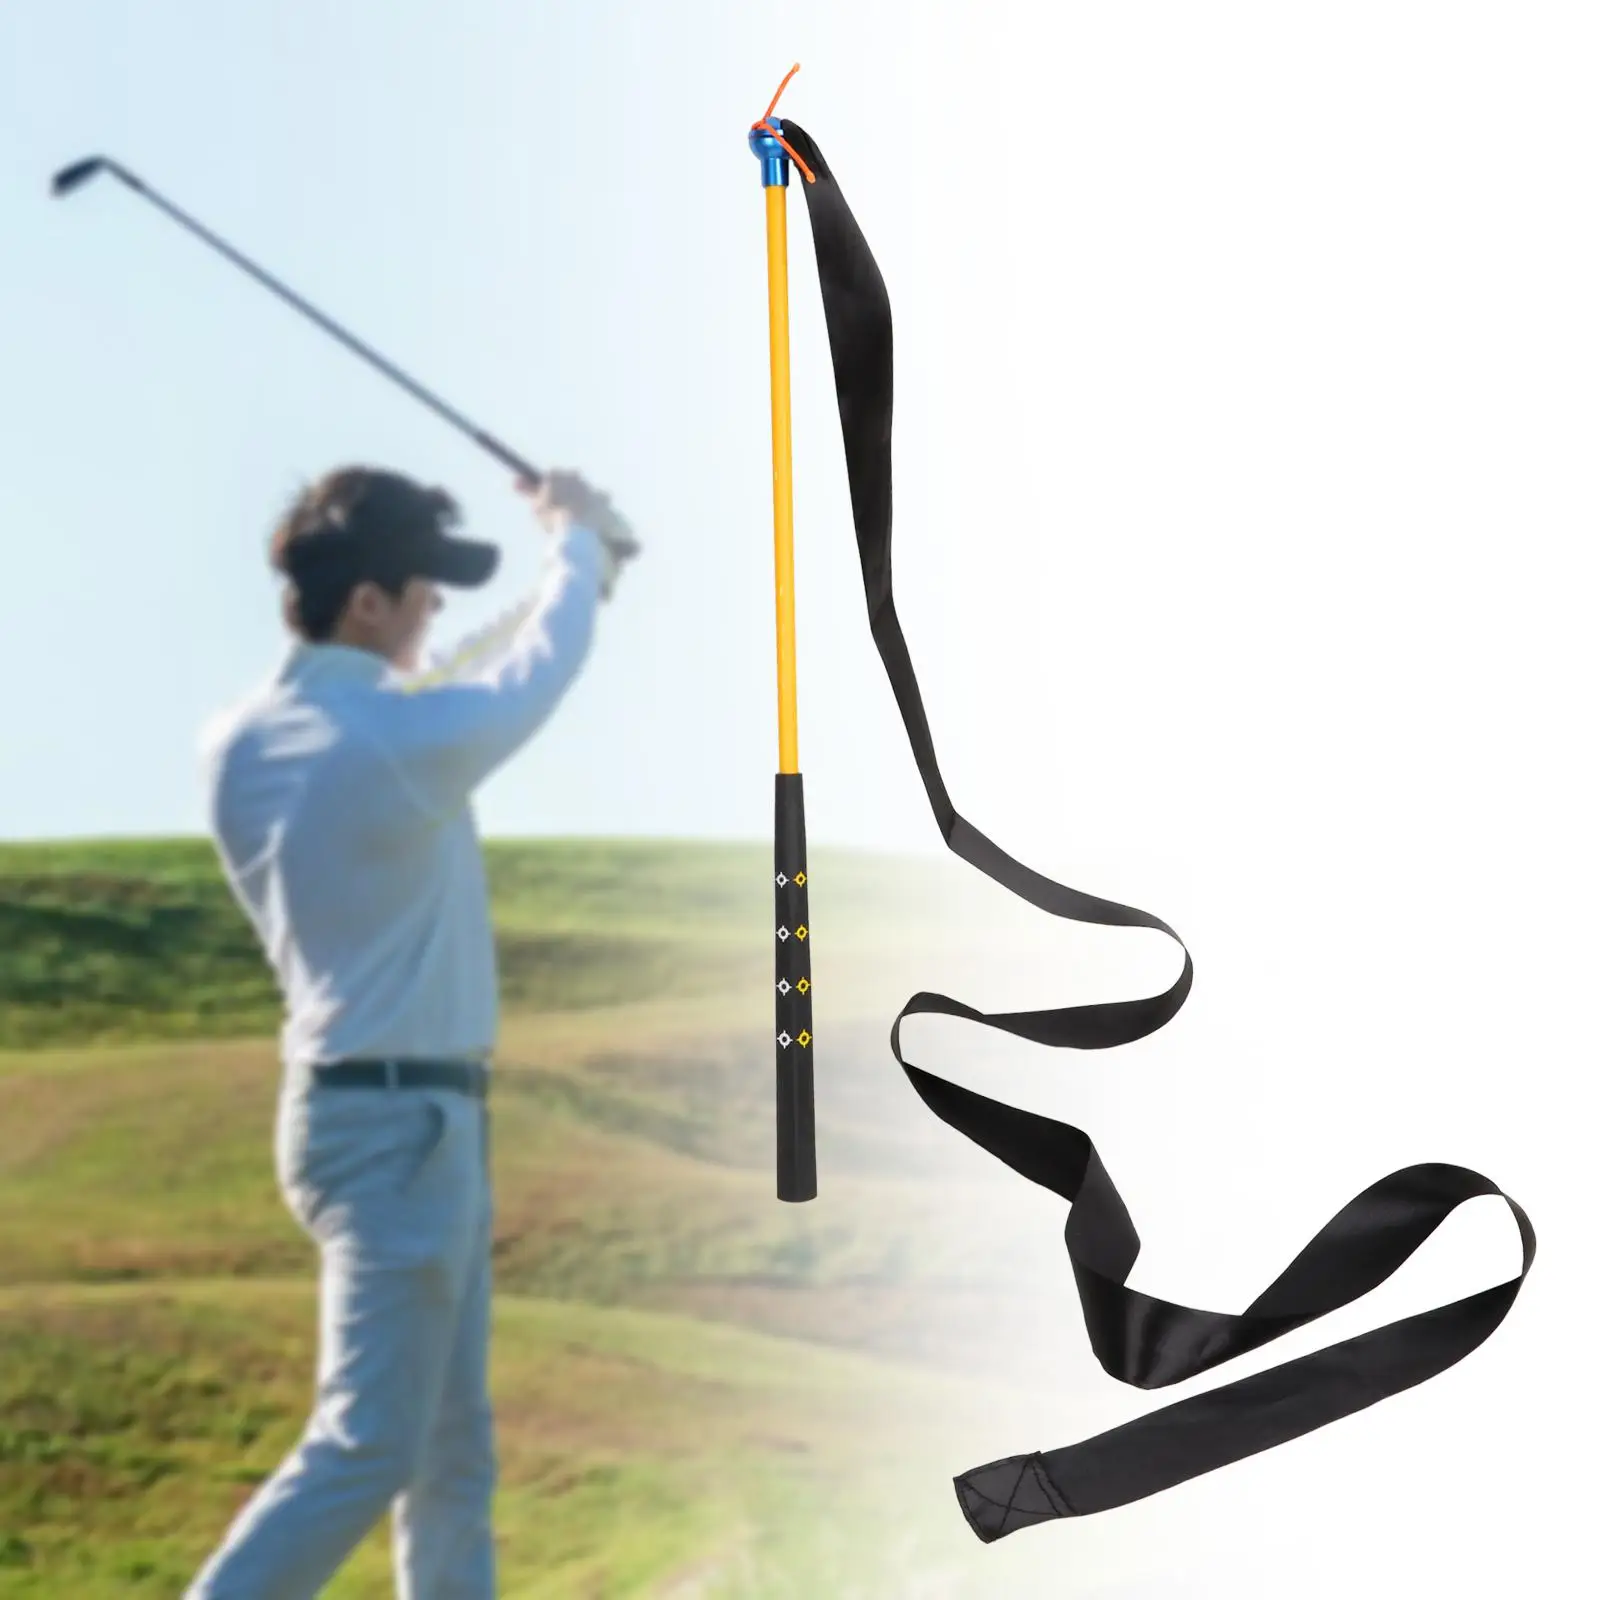 

Golf Swing Trainer Warm up Rod Kids Practical Practice Aid Comfortable Grip Beginners Golf Swing Training Swing Trainer Stick